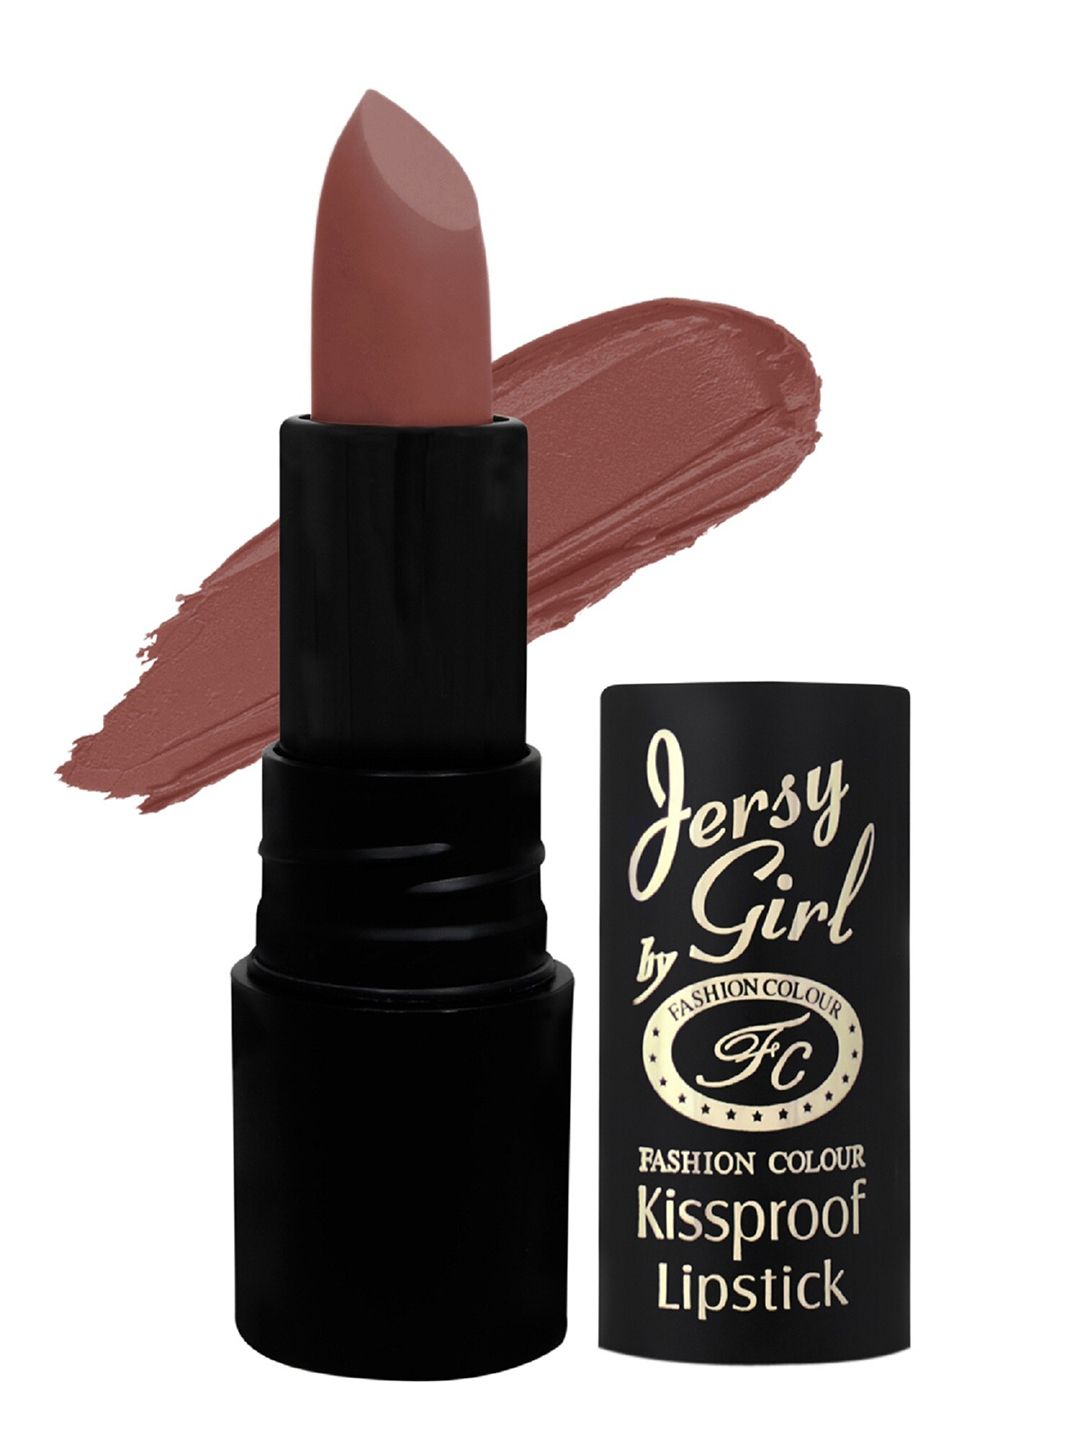 Fashion Colour Jersy Girl Kiss proof Lipstick 3.8g Price in India